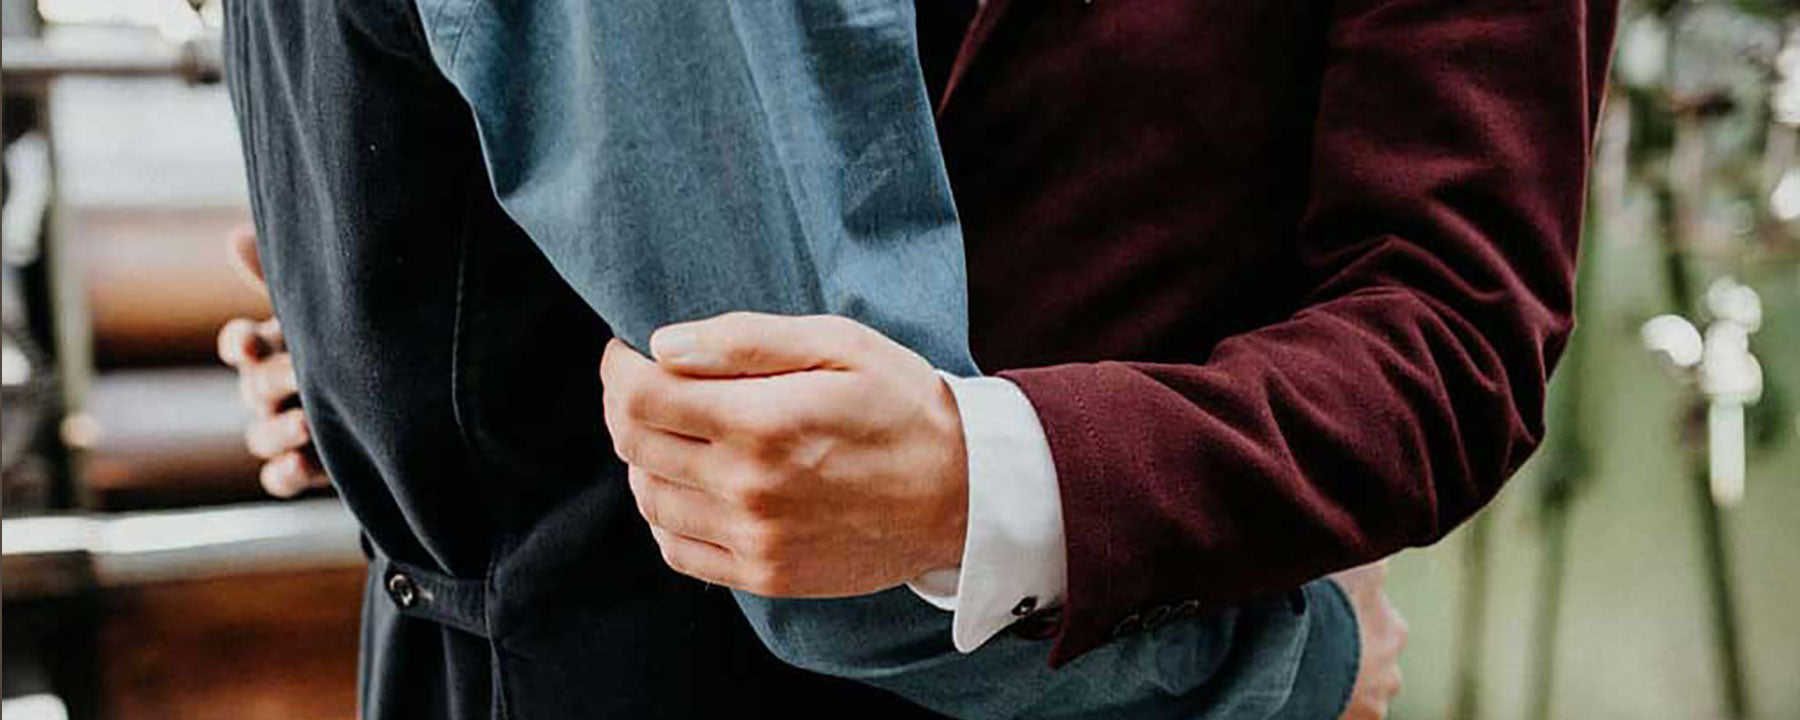 A faceless shot of two torsos wearing fitted suits and embracing, presumably a couple of white gay men at their wedding